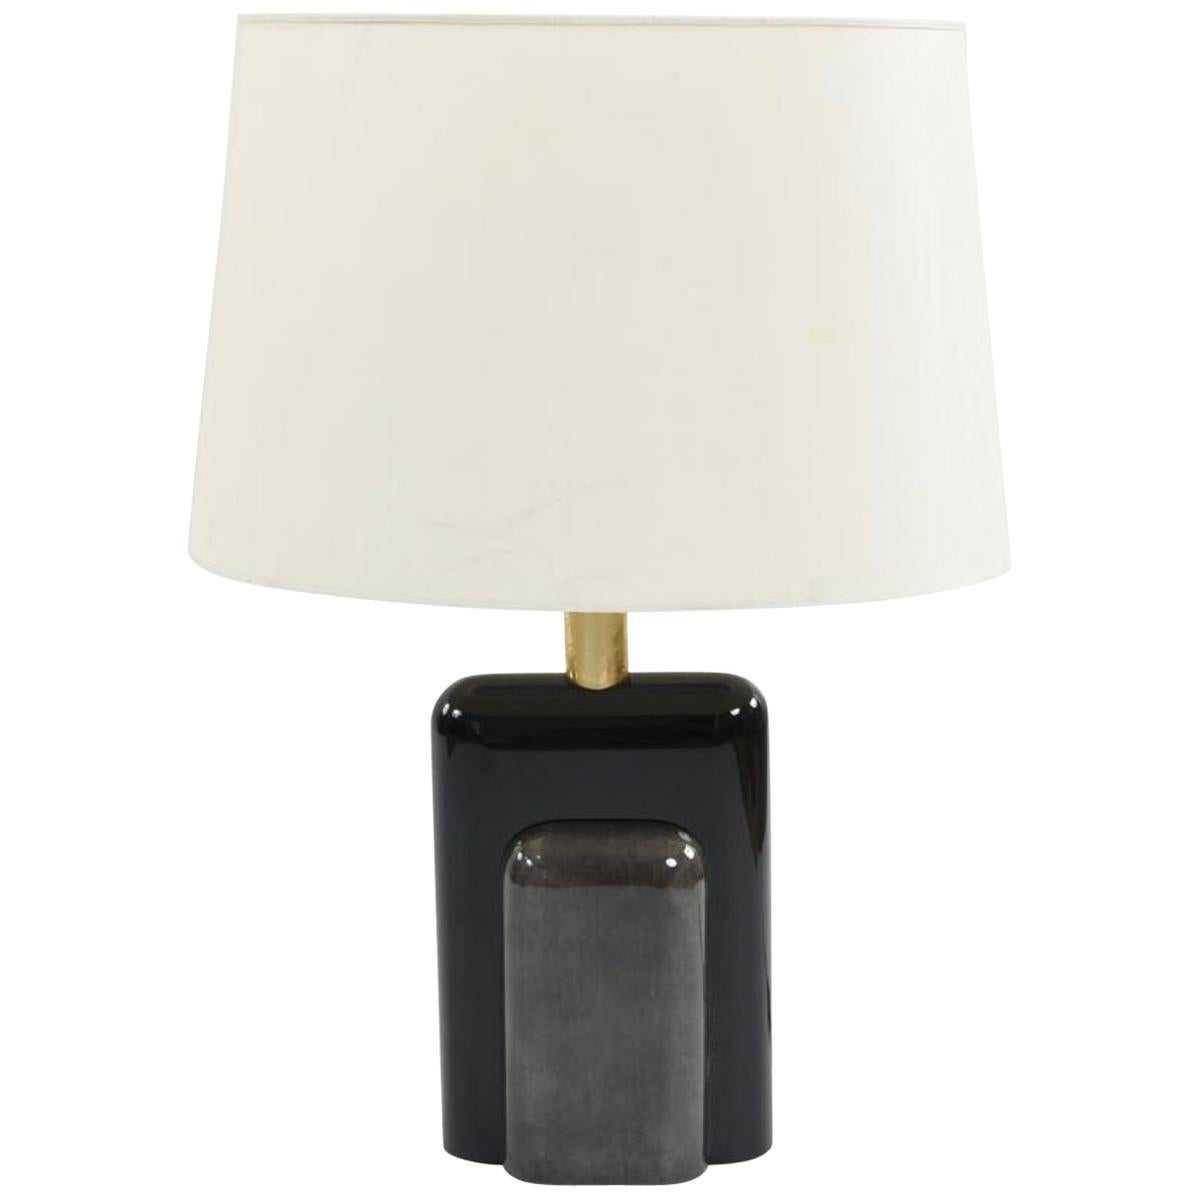 Italian Moderne Goatskin and Lacquer Lamp